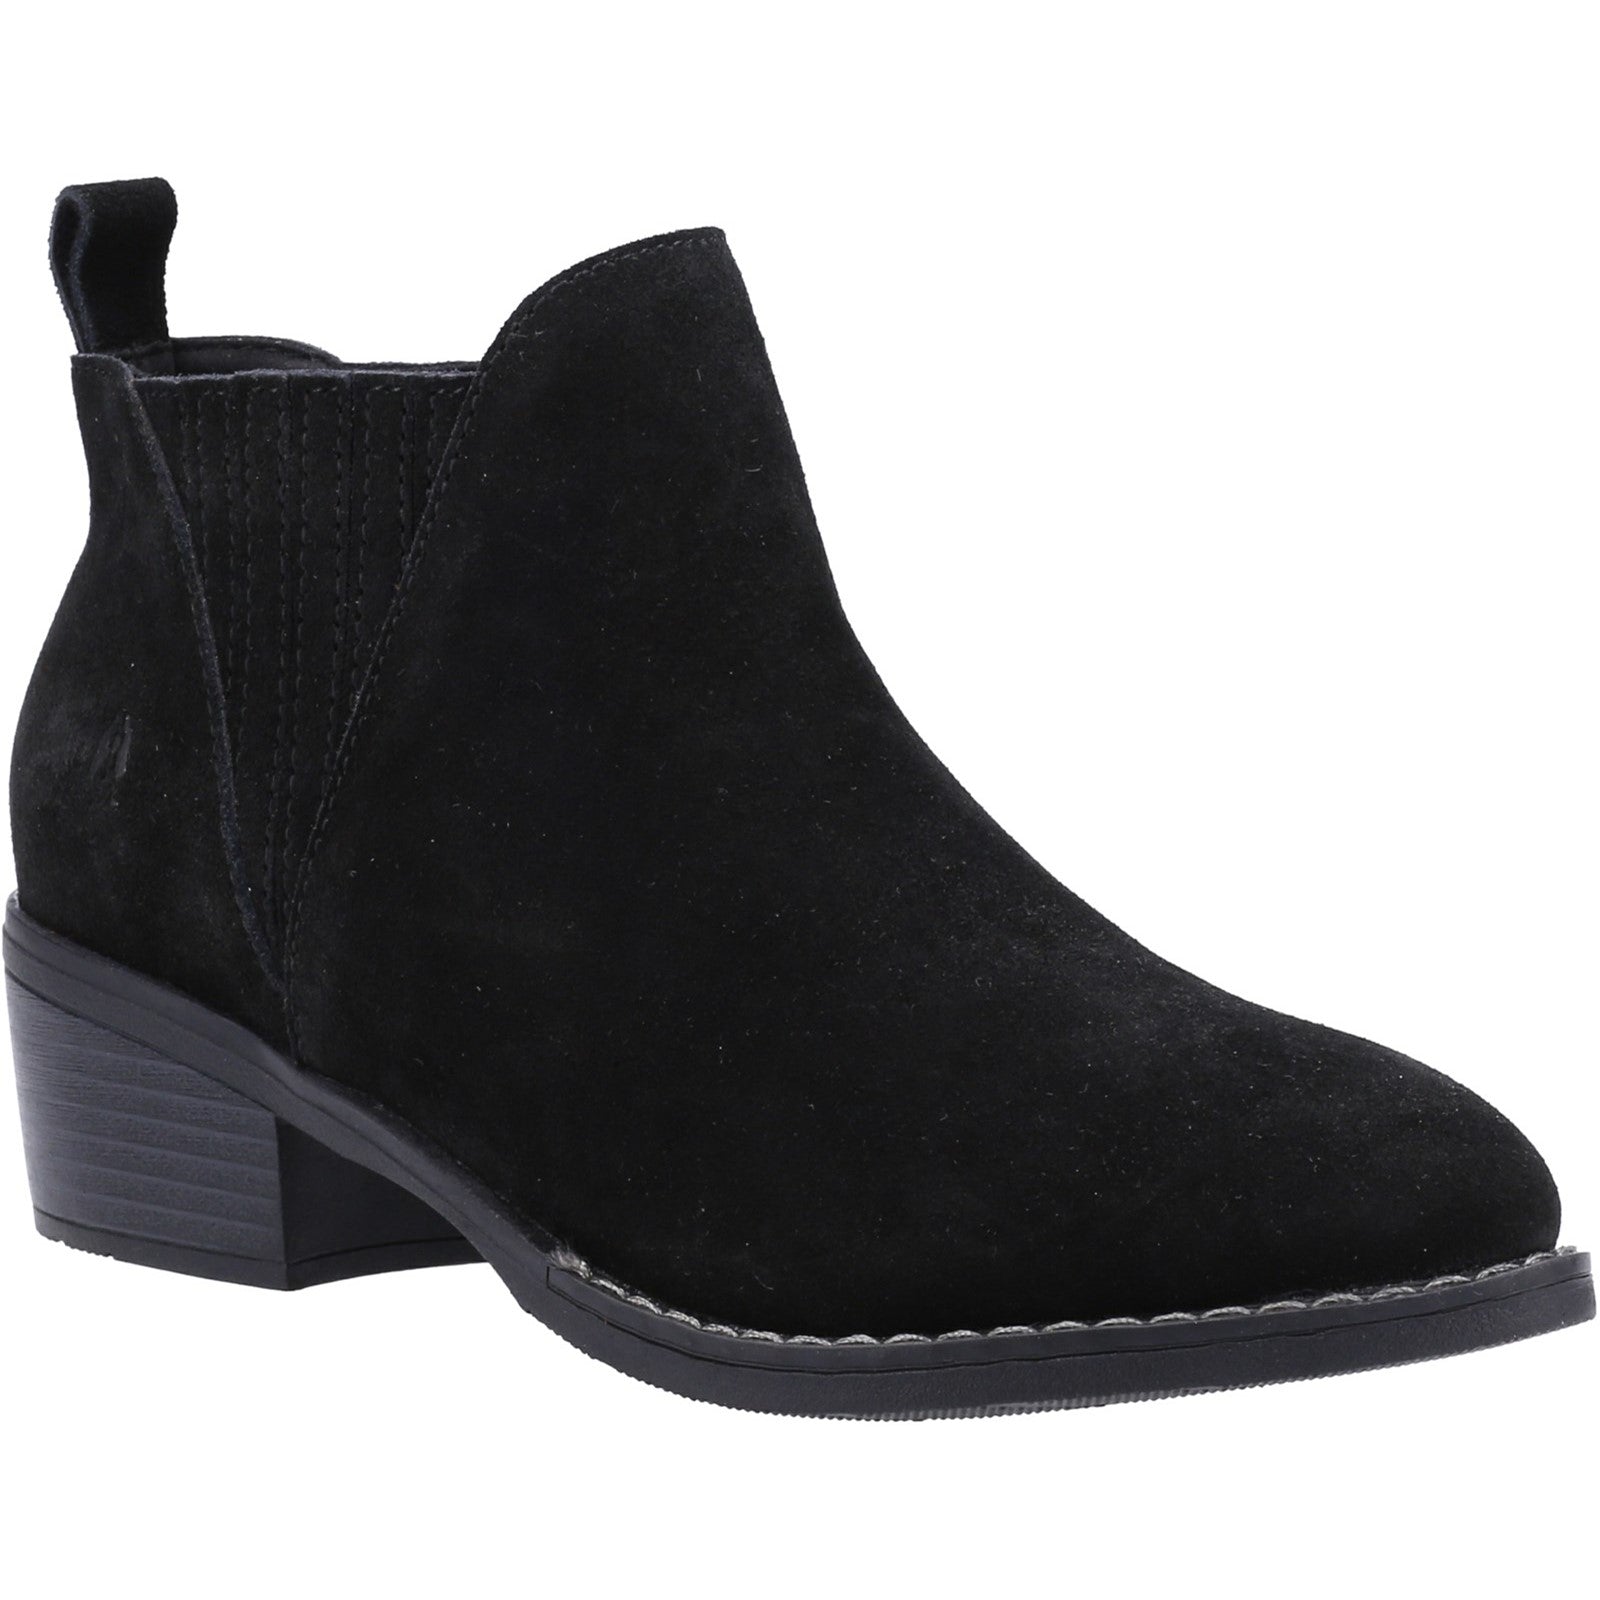 Ladies Ankle Boots Black Hush Puppies Isobel Ankle Boot